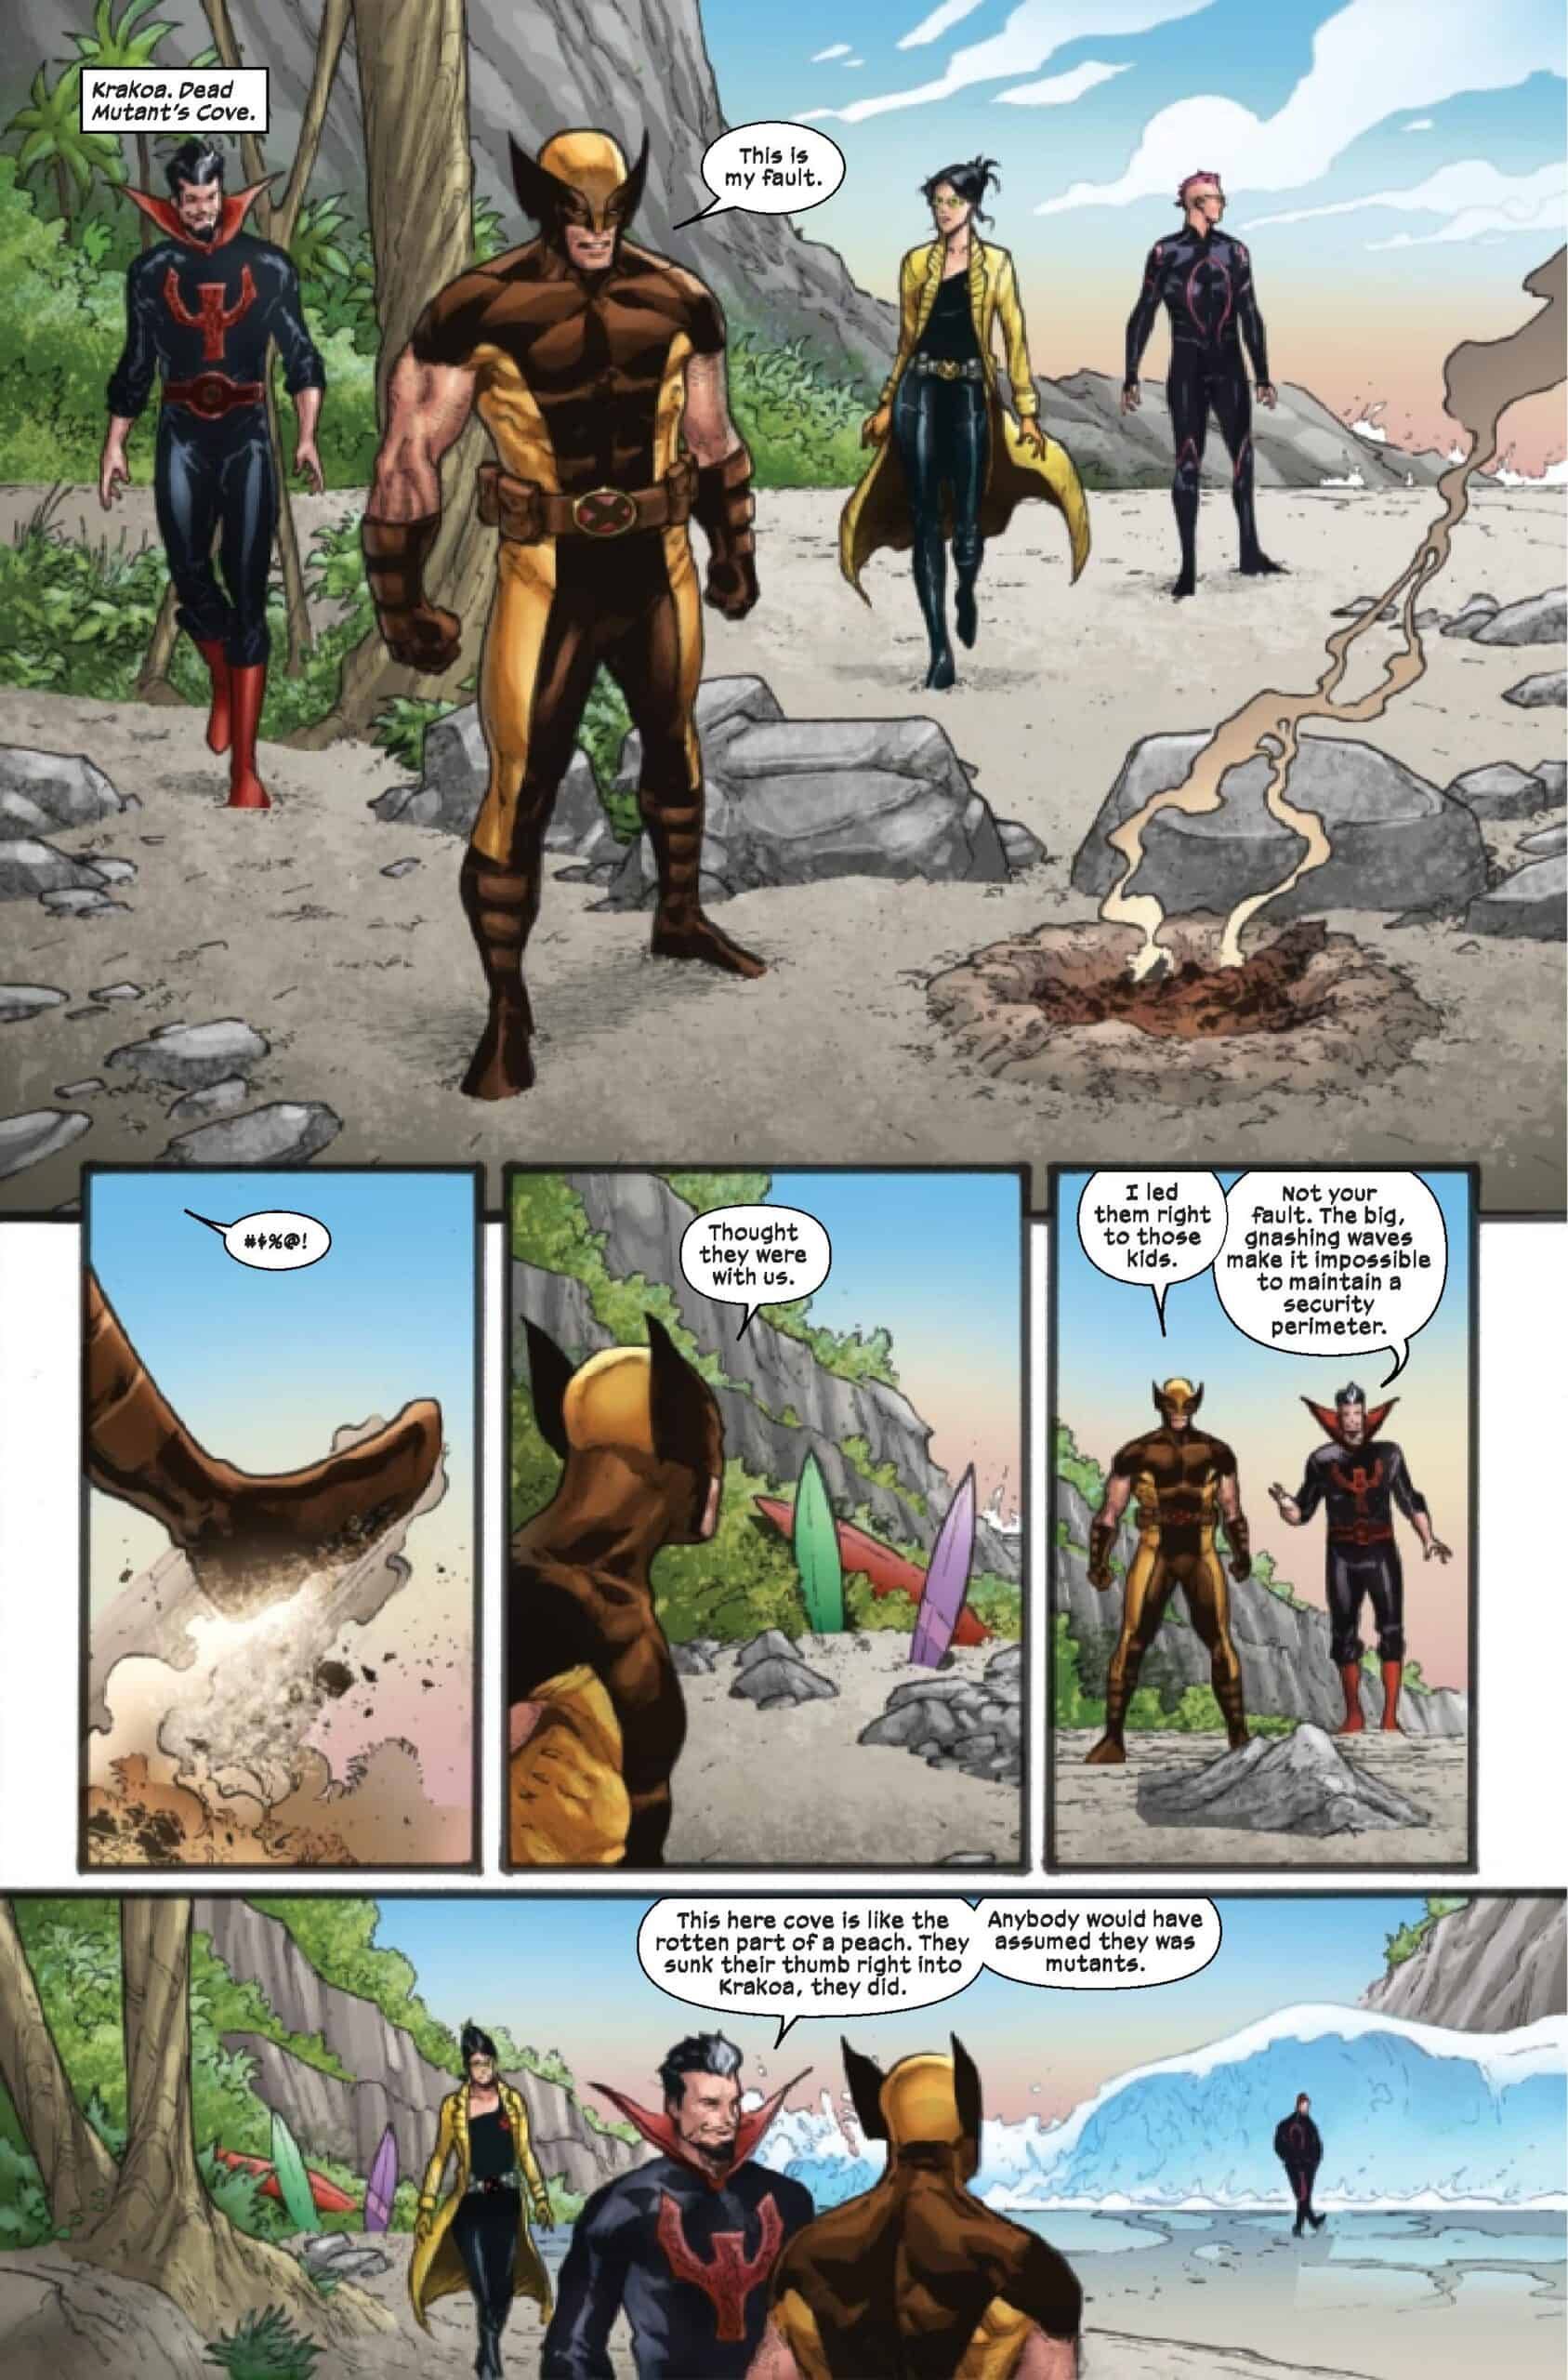 The XMen Learn Their Island Home Isnt As Safe As They Thought